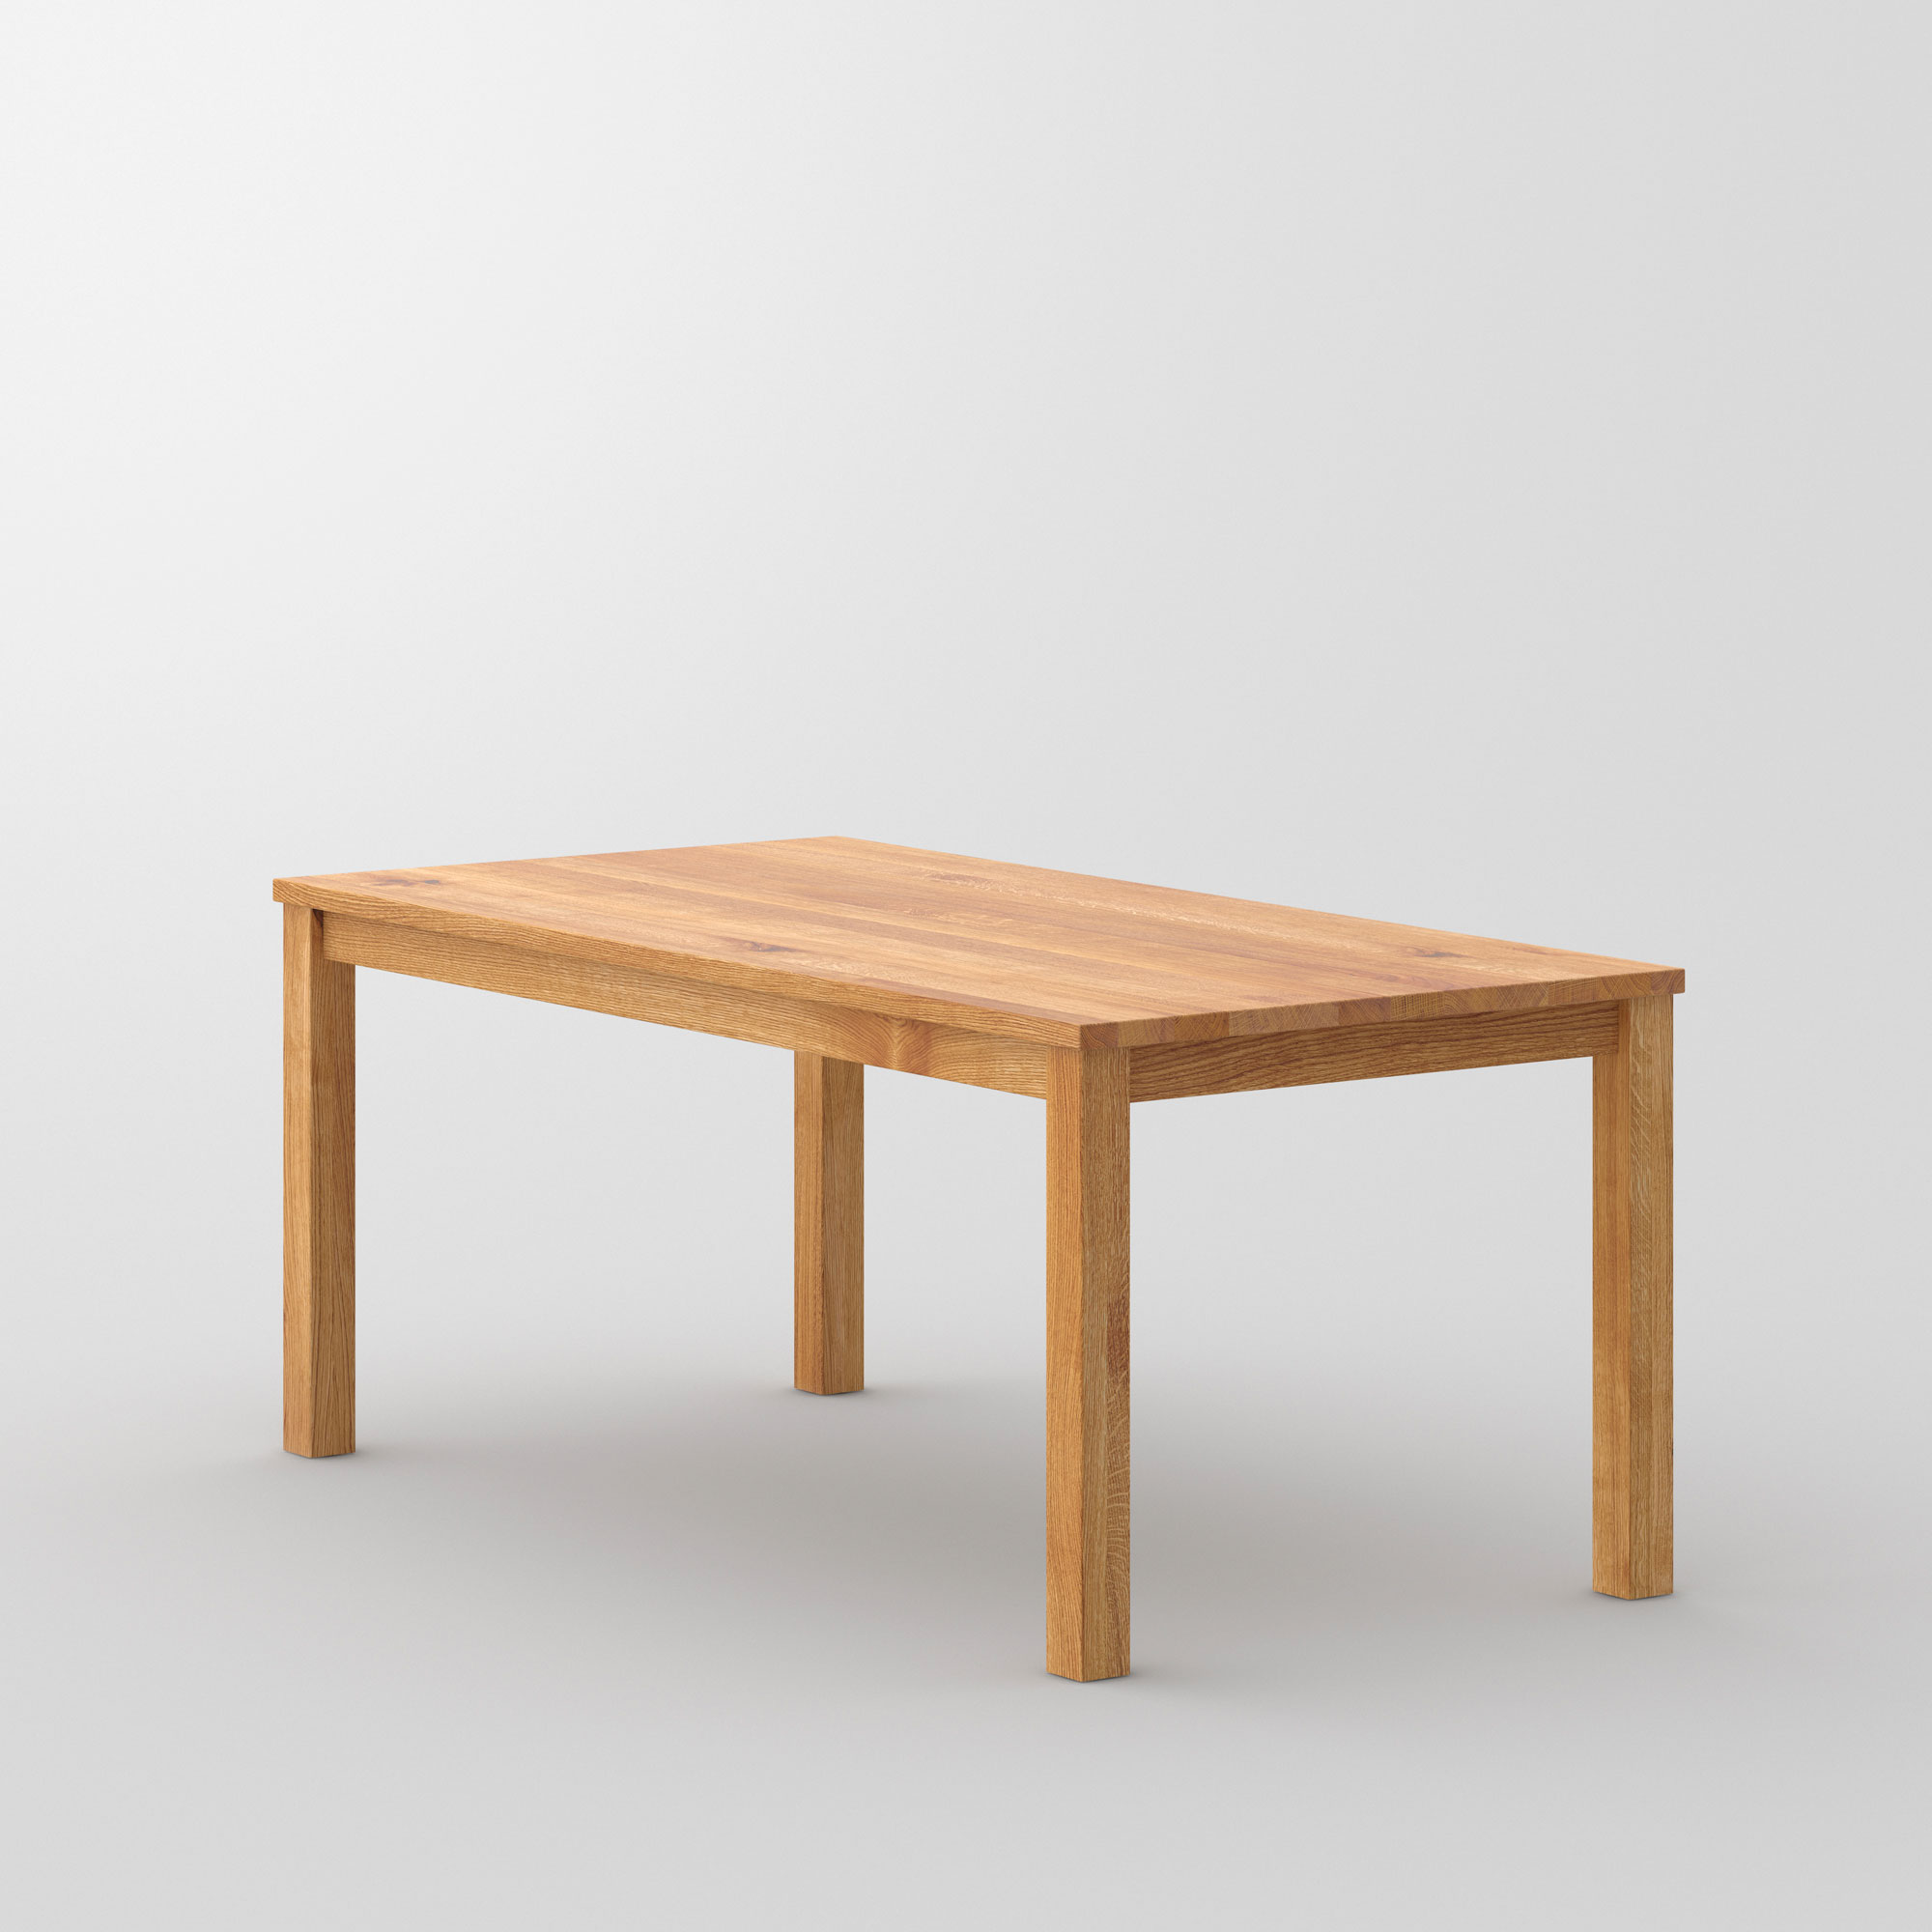 Custom-Made Solid Wood Table FORTE 3 B7X7 cam3 custom made in solid wood by vitamin design